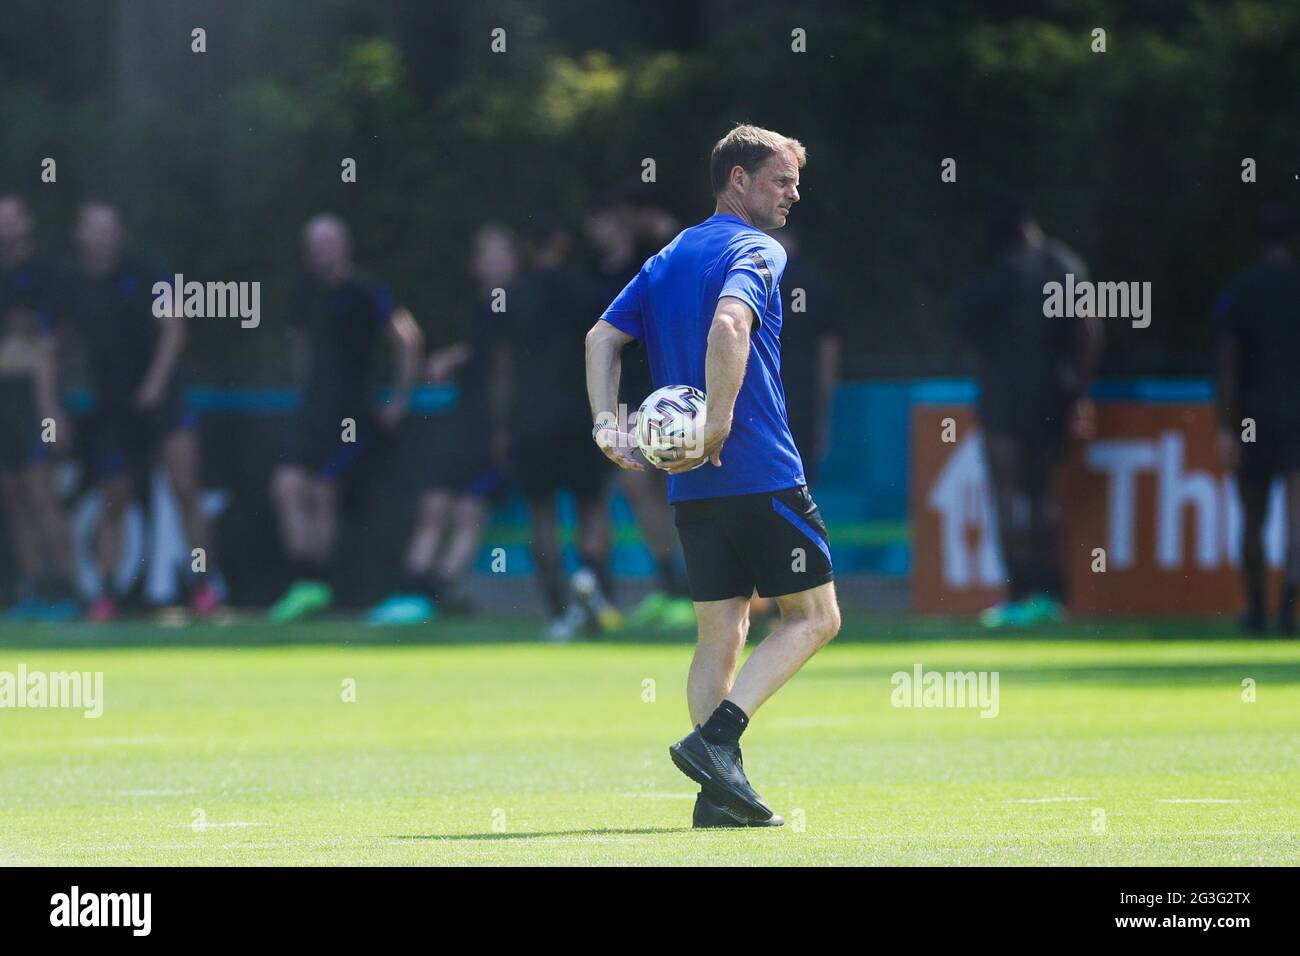 Zeist, Netherlands. 16th June, 2021. Coach of the Netherlands, Frank de Boer, reacts during a training session ahead of the UEFA Euro 2020 Championship Group C match between the Netherlands and Austria at the KNVB Campus in Zeist, the Netherlands, June 16, 2021. Credit: Zheng Huansong/Xinhua/Alamy Live News Stock Photo